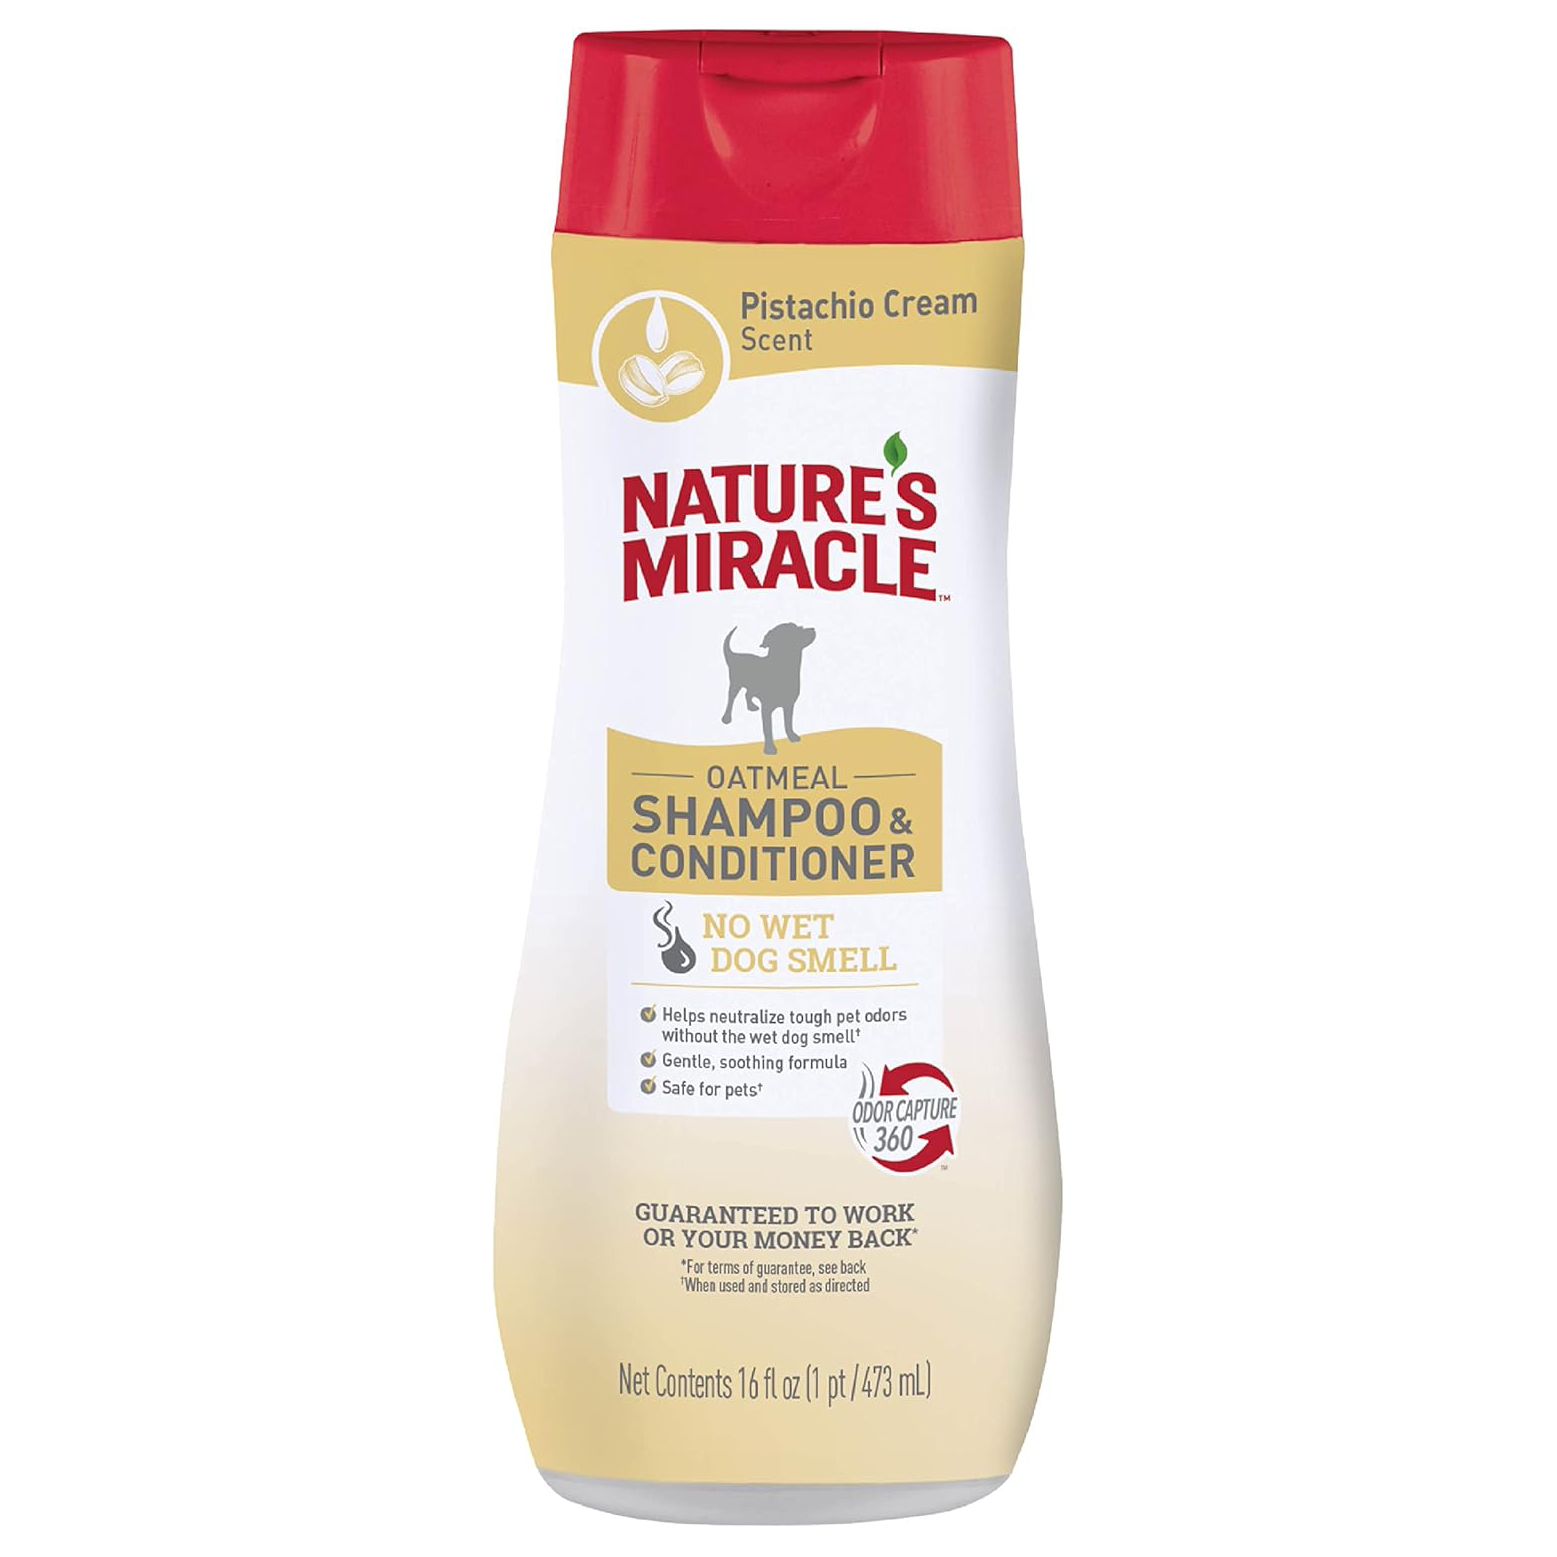 Nature's Miracle Dog Shampoo & Conditioner